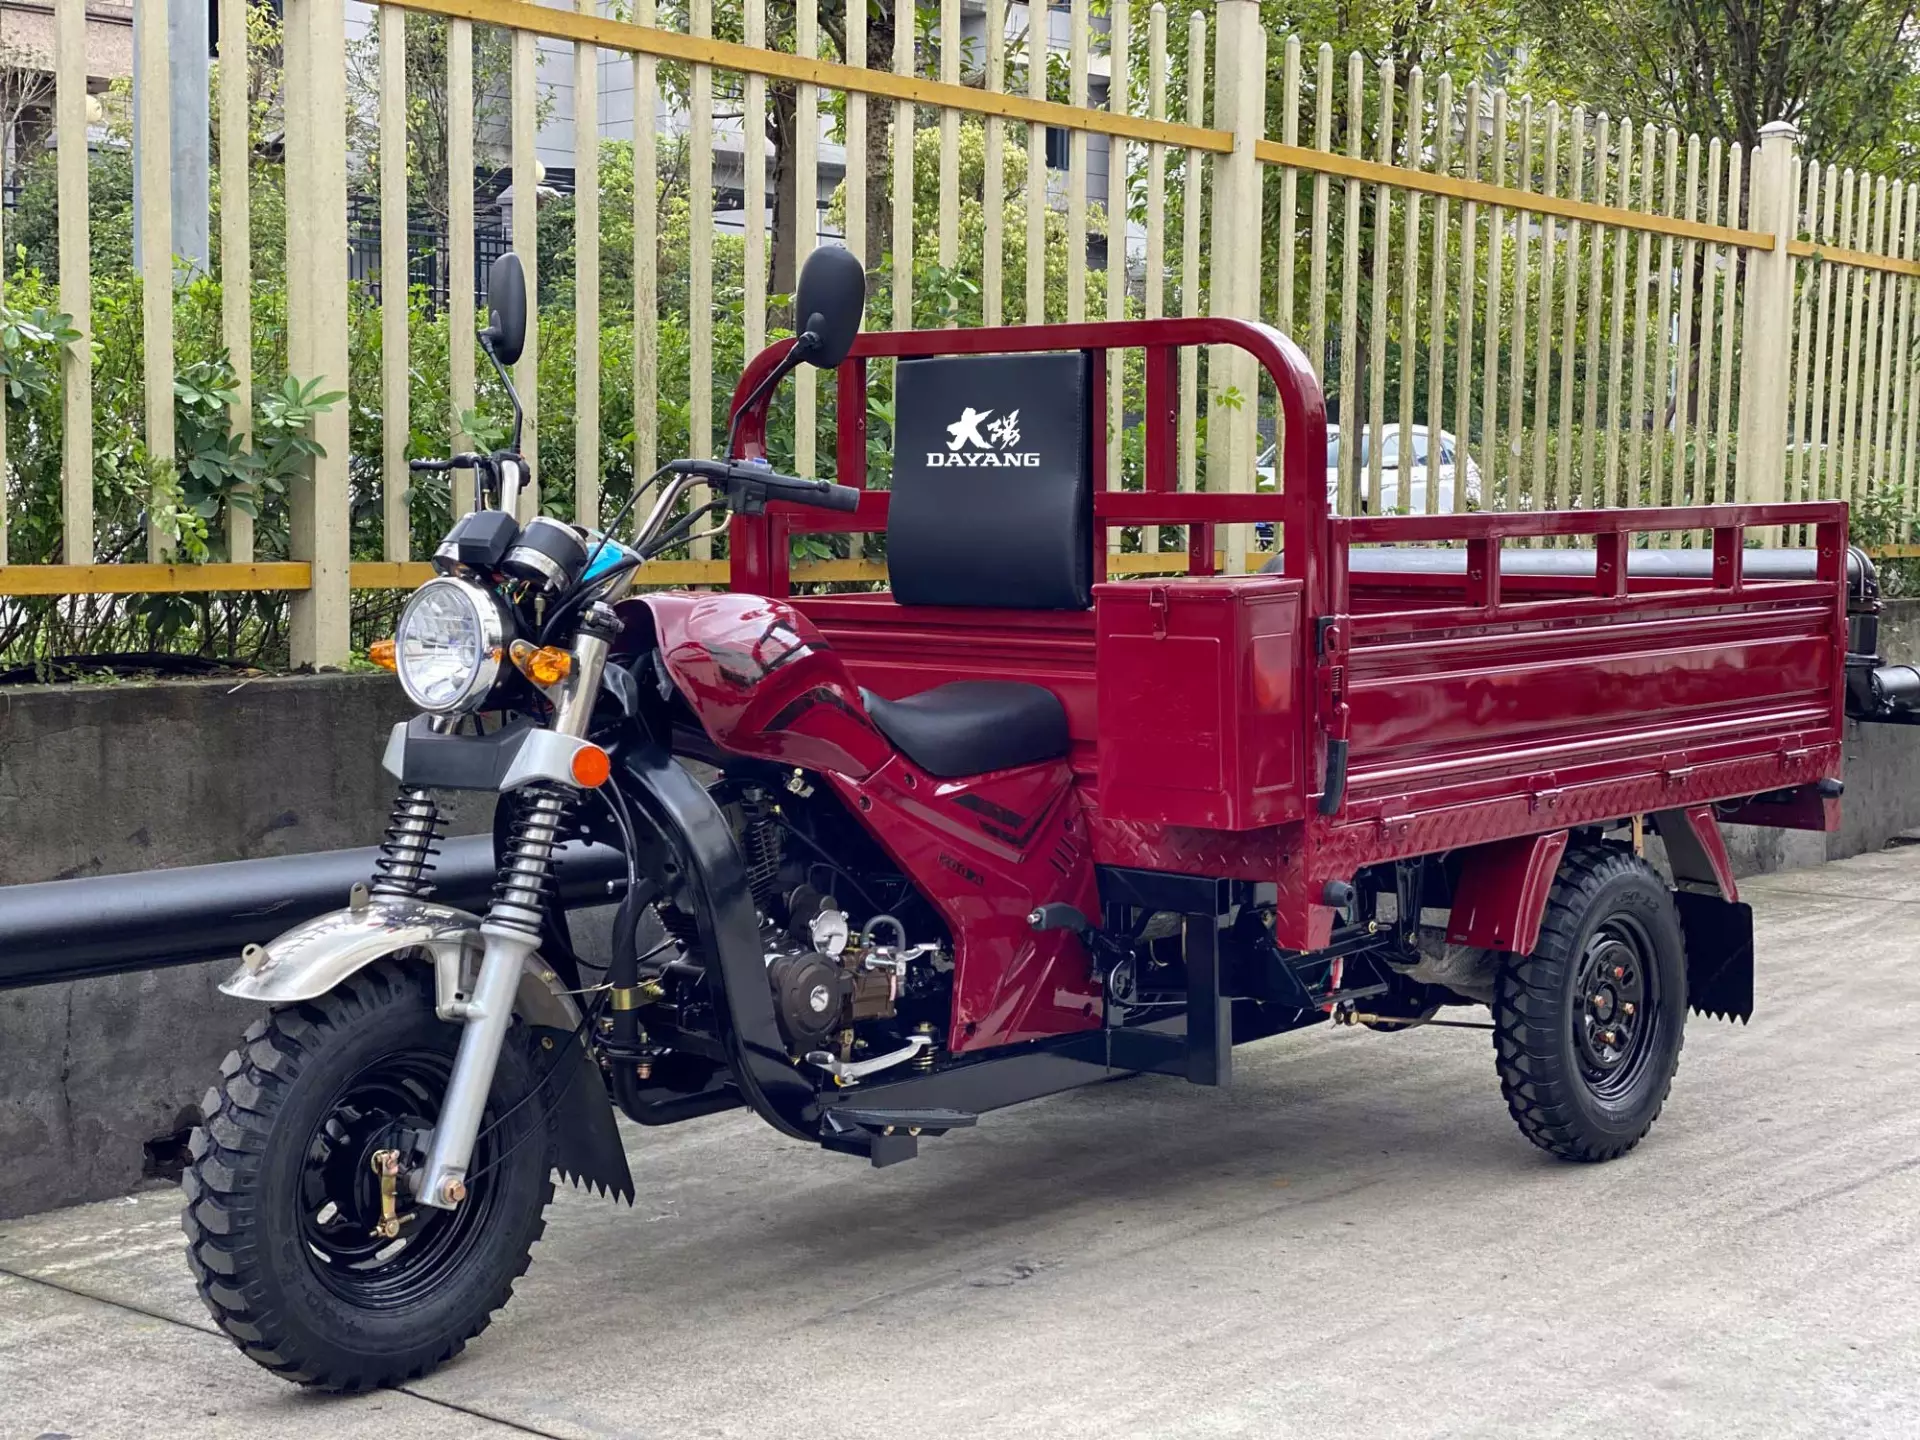 Brand well sell Quality classical light loading truck cargo  Motorized Cargo Tricycle 3 Wheel Motorcycle150CC/175CC/200CC